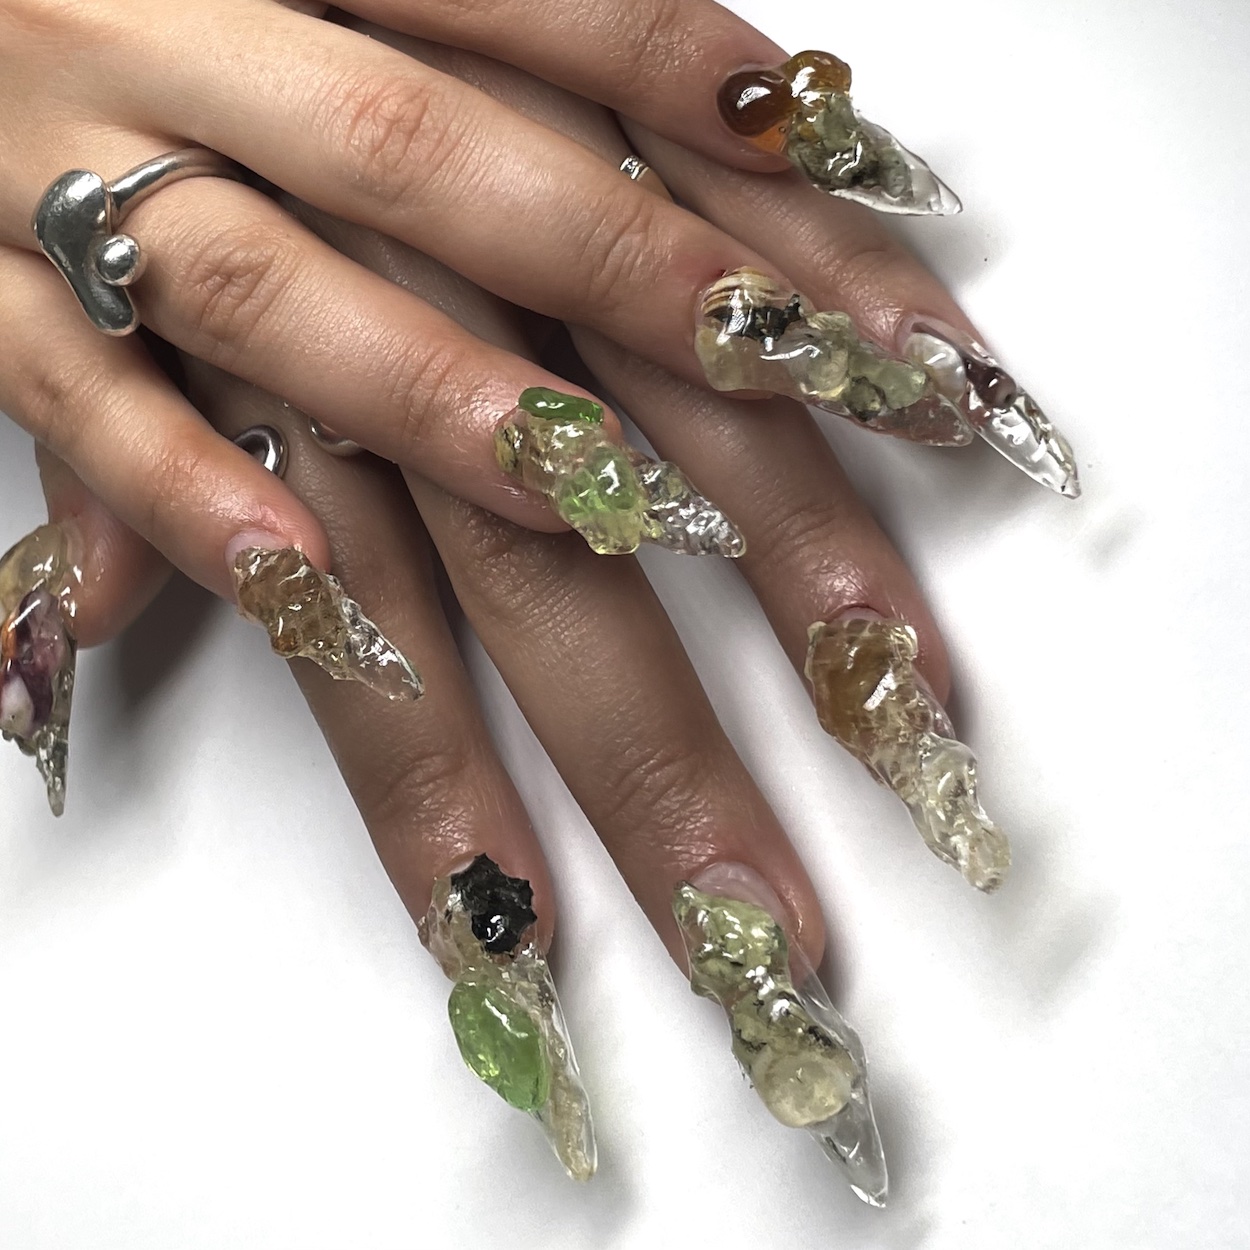 Manicurist Jenny Bui Shares Tips on How to Apply Nail Bling